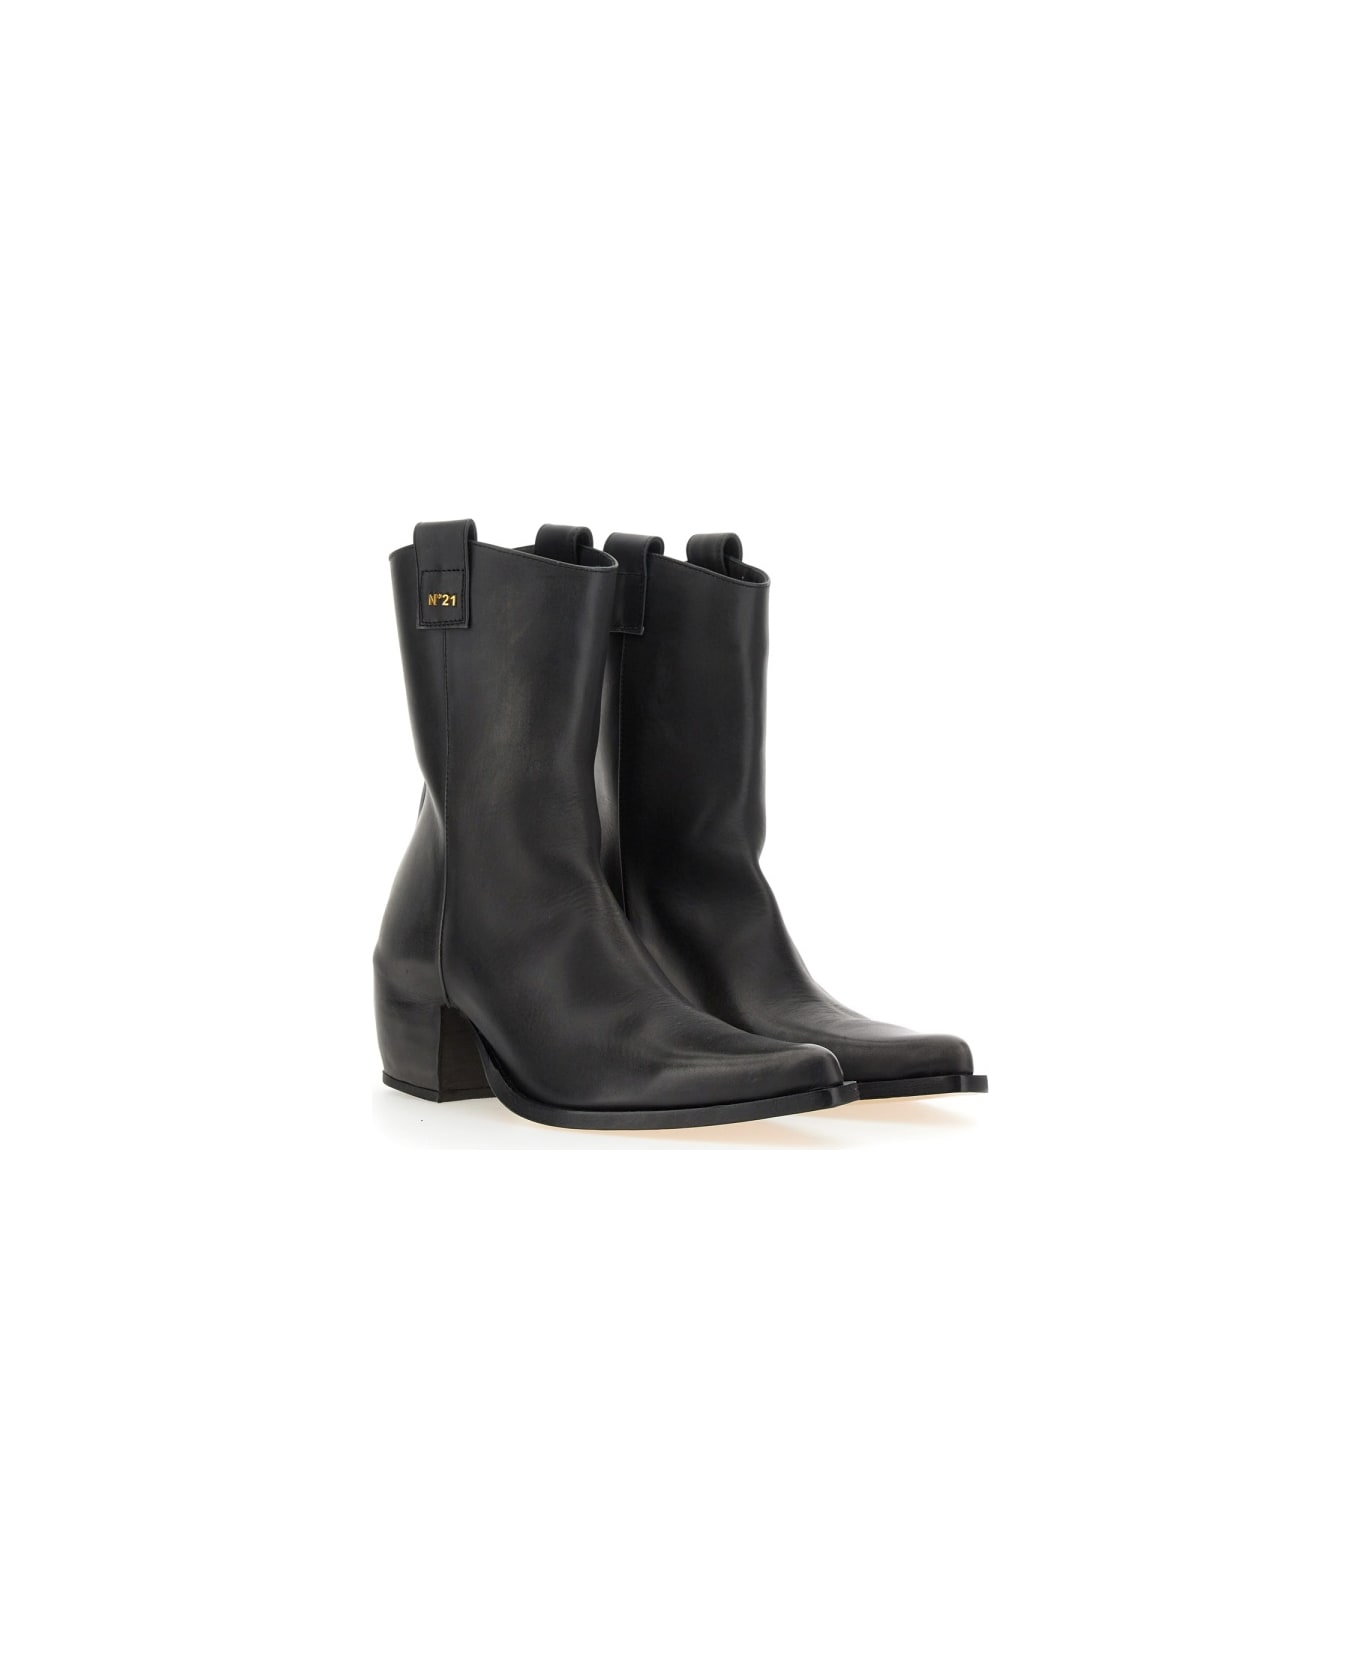 N.21 Leather Boot - BLACK